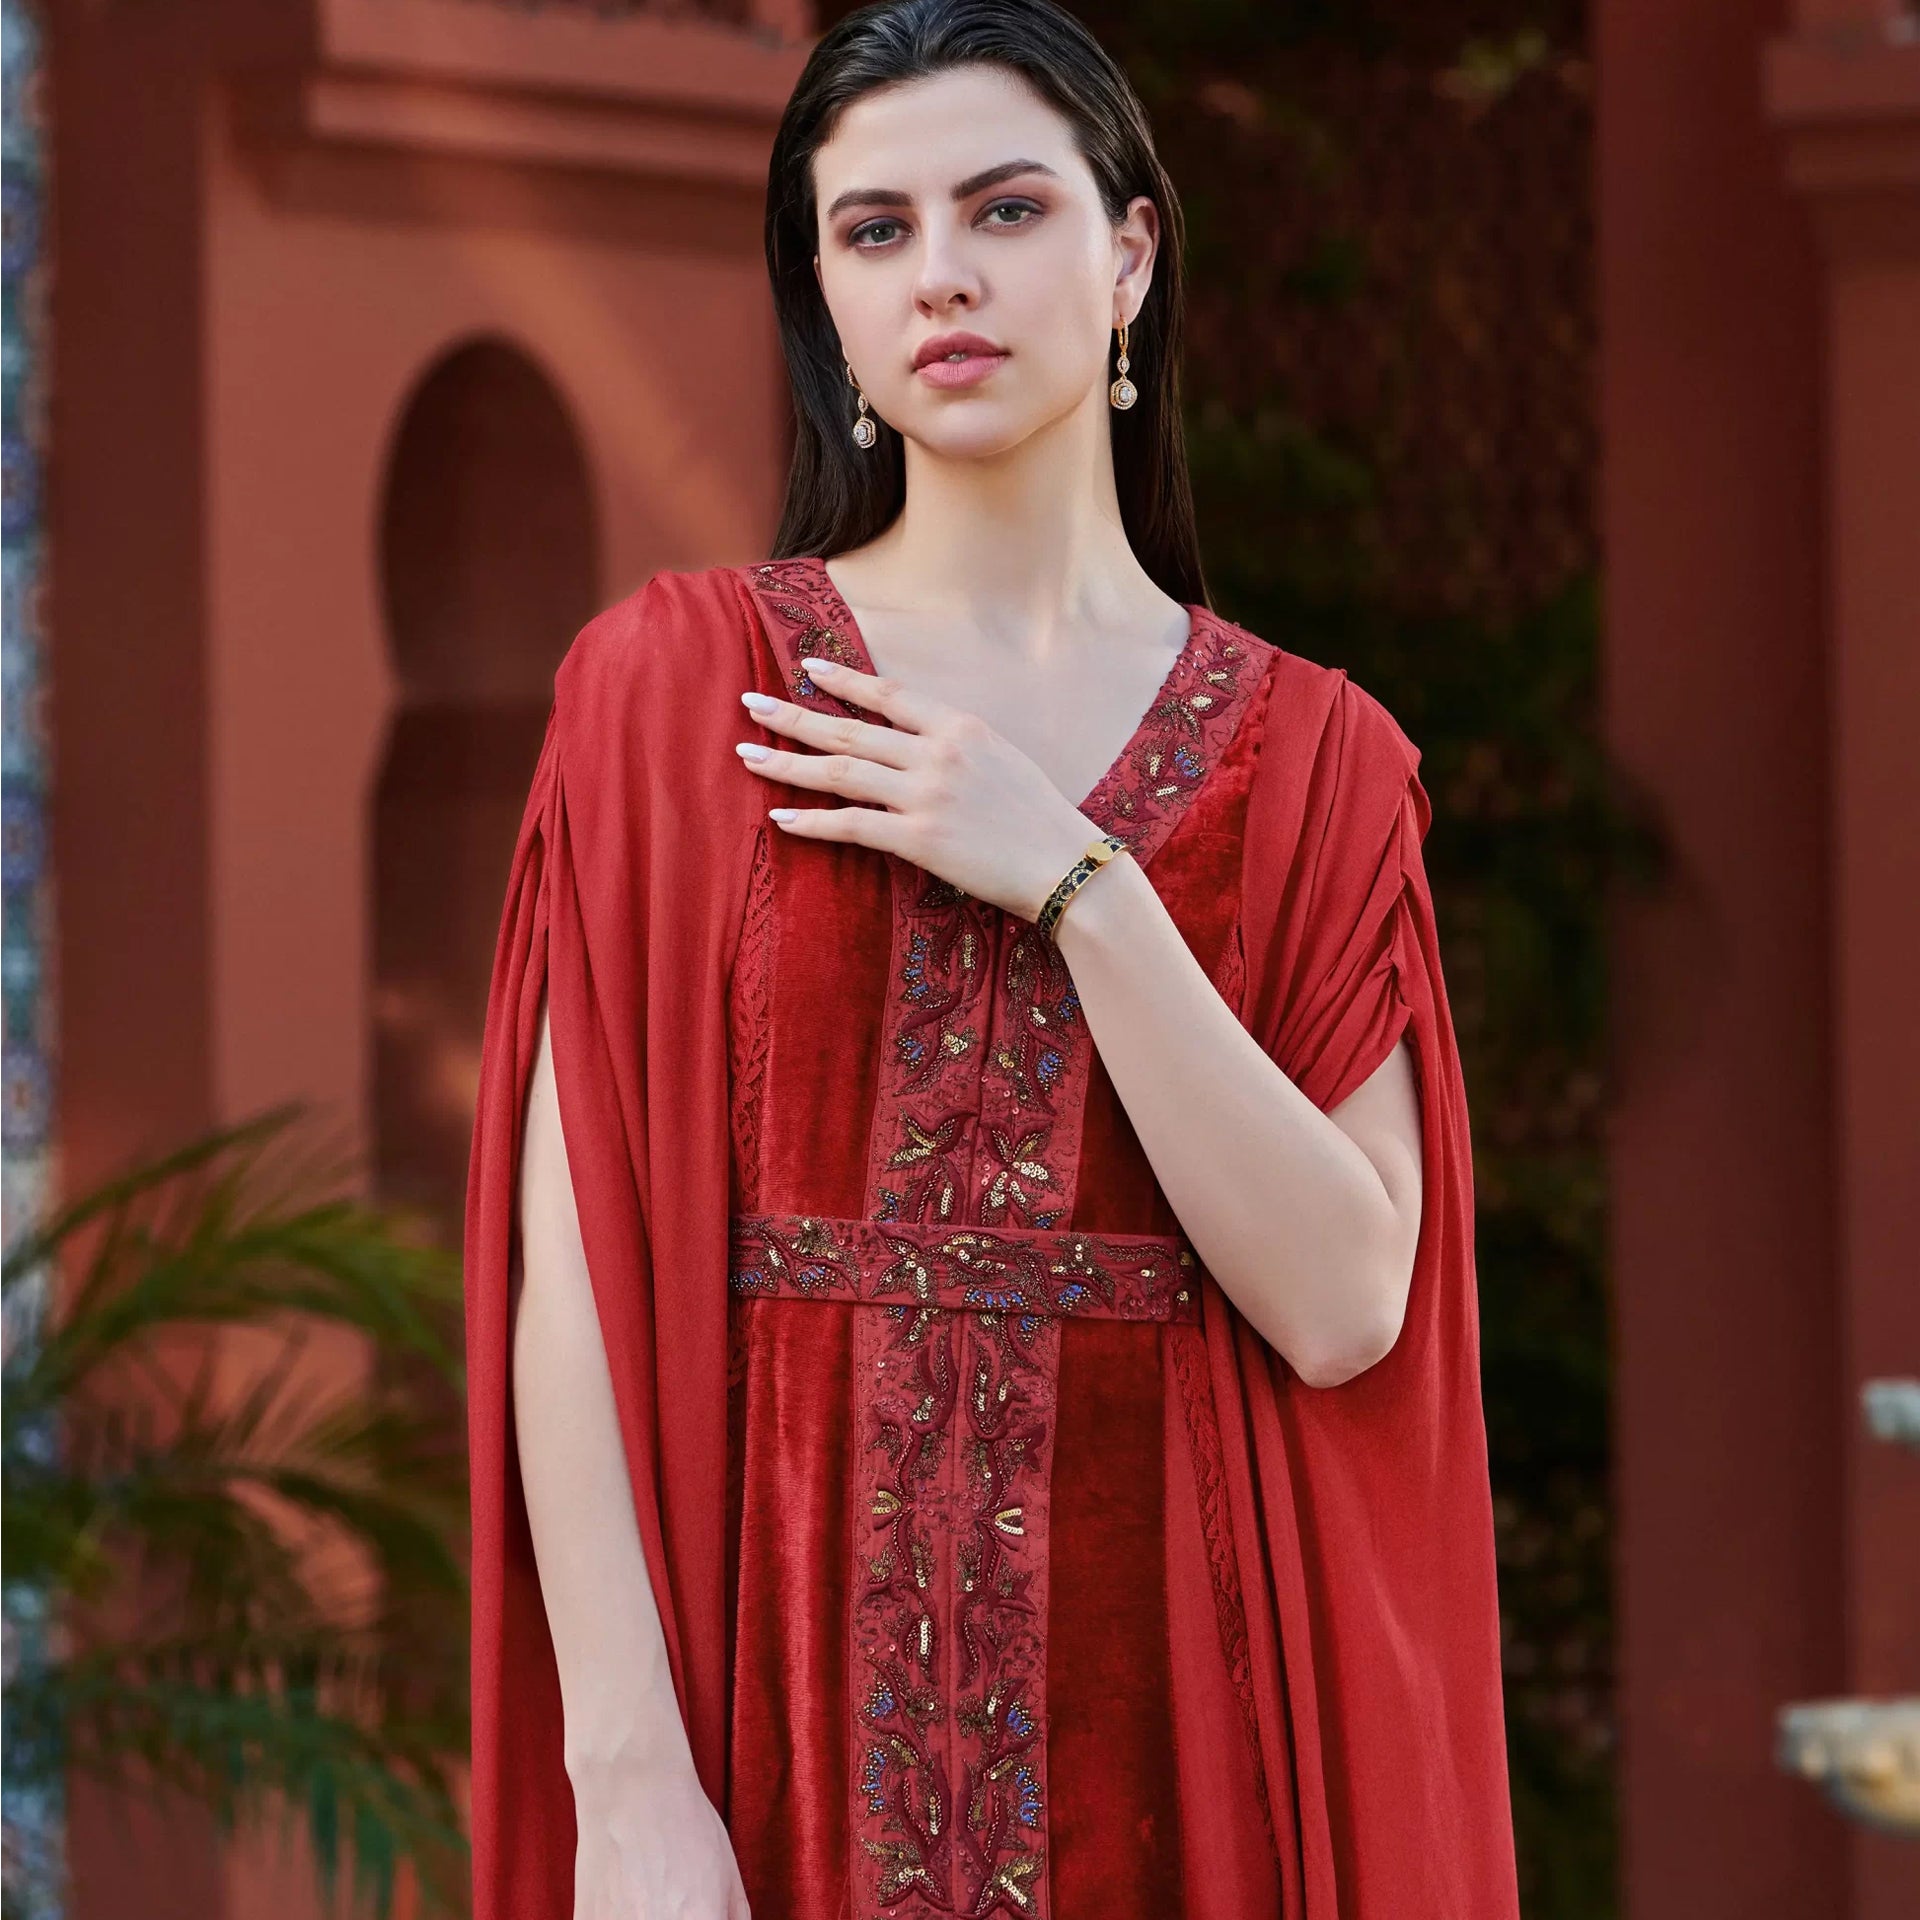 Burgundy Bisca Dress With Gold Embroidery From Shalky